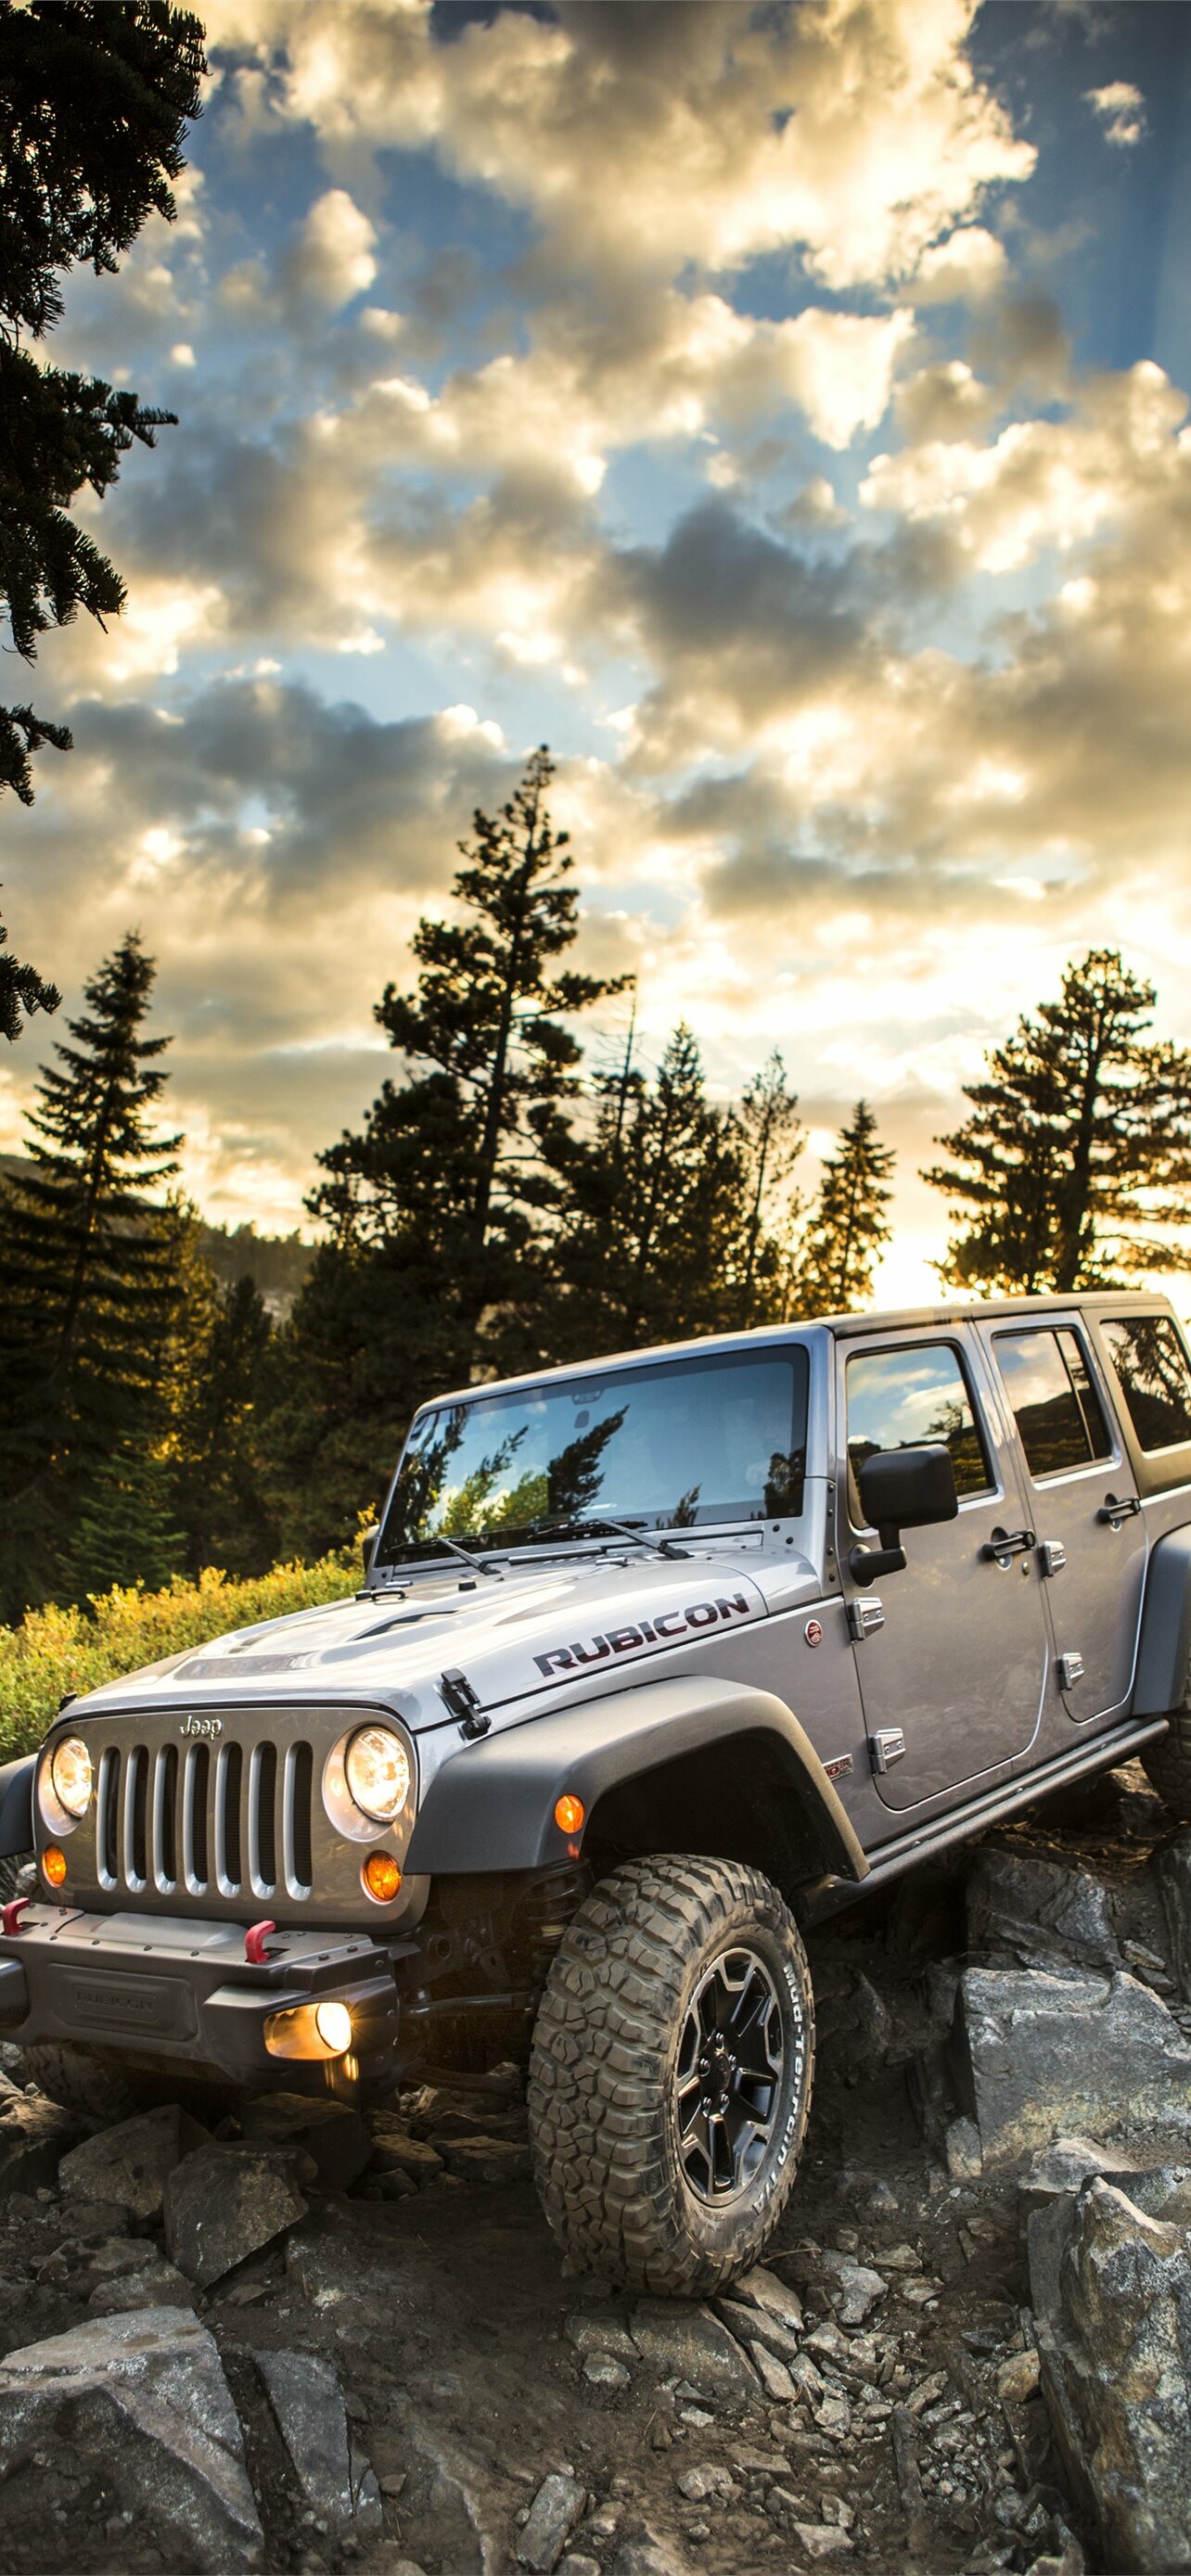 Jeep: The king of off-road vehicles, Automotive lighting. 1290x2780 HD Wallpaper.